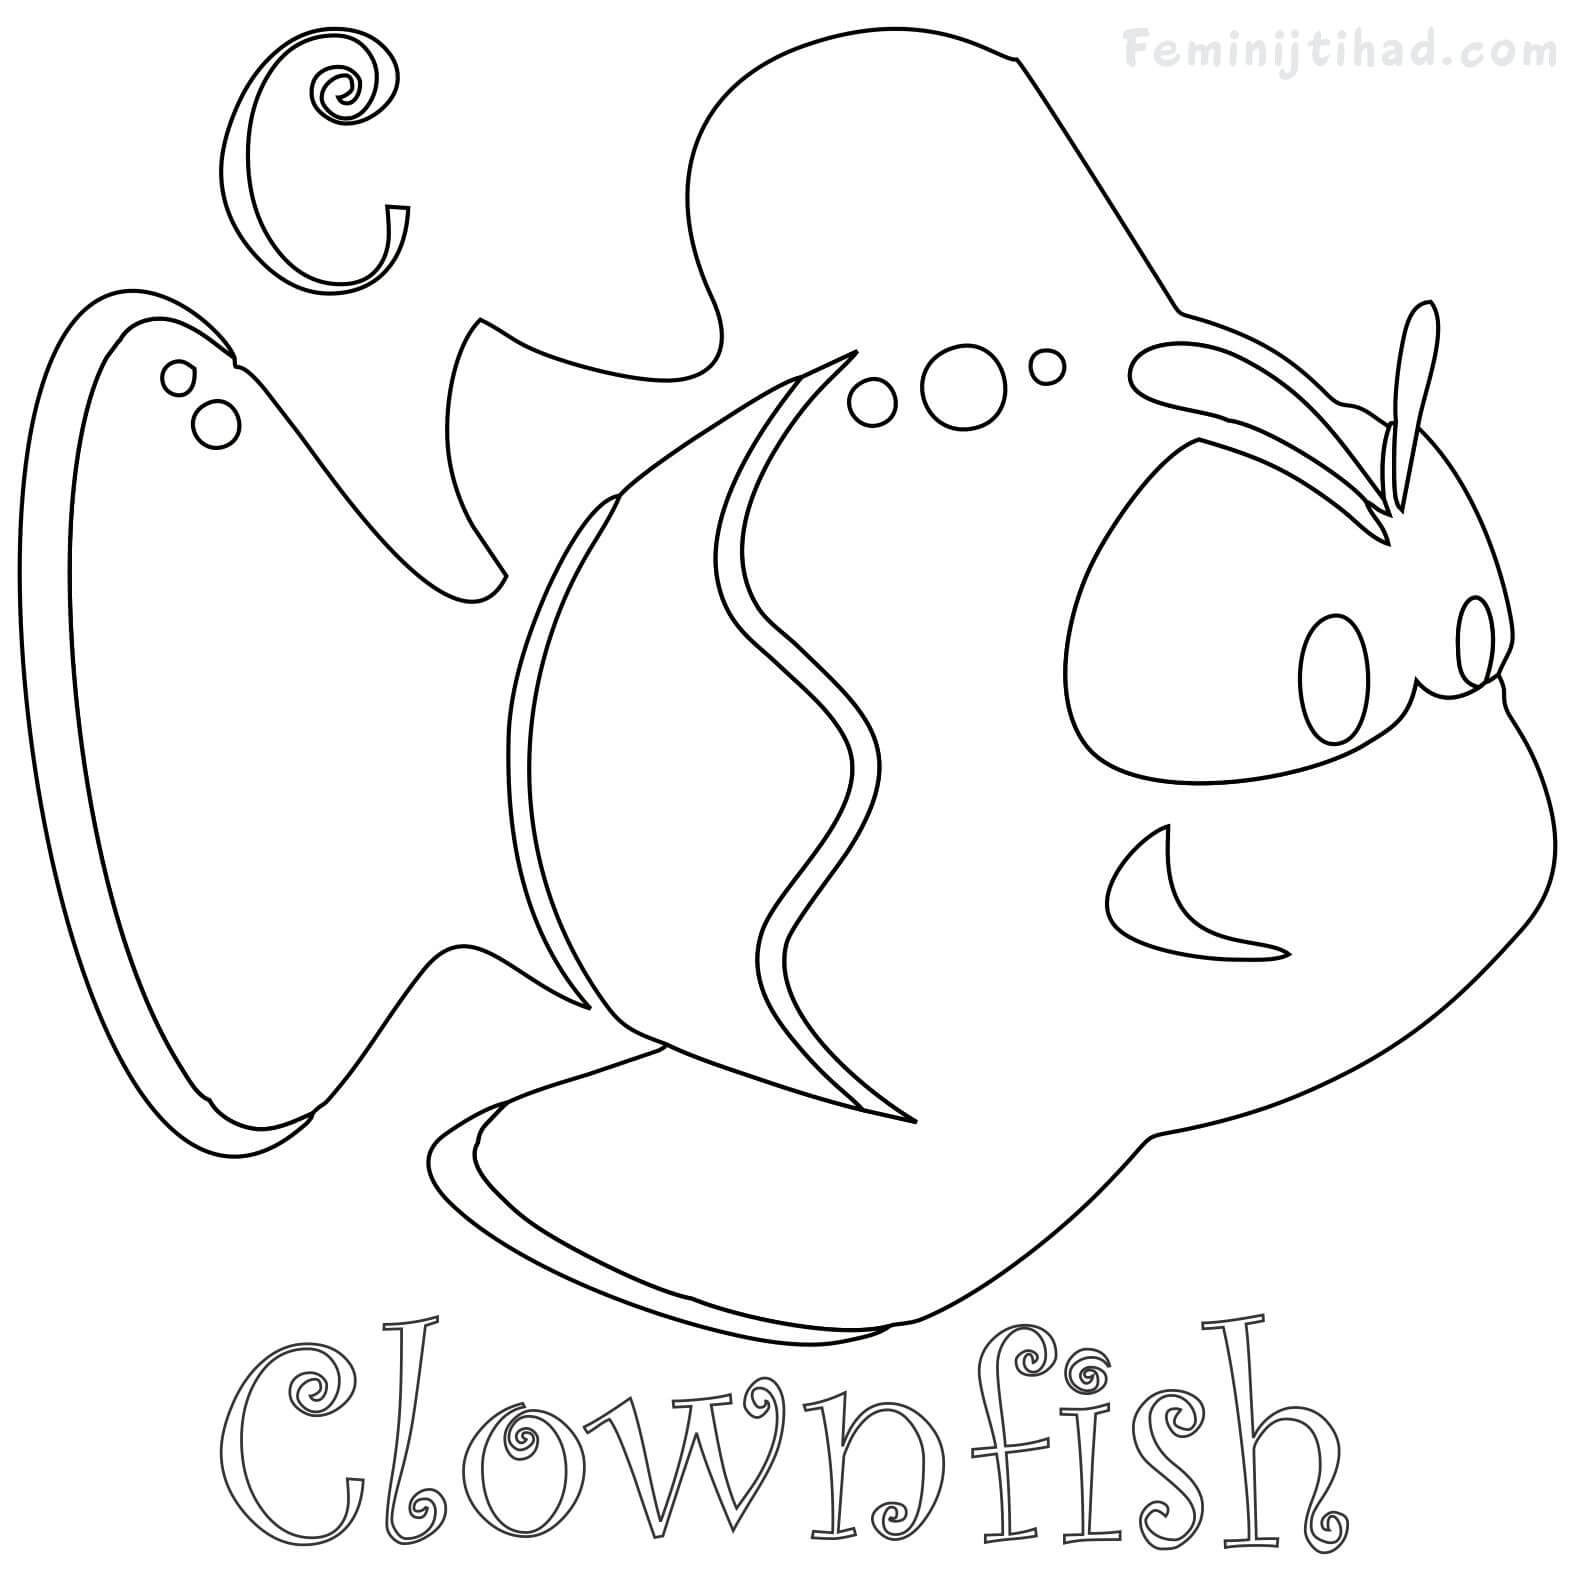 coloring page of a clown fish